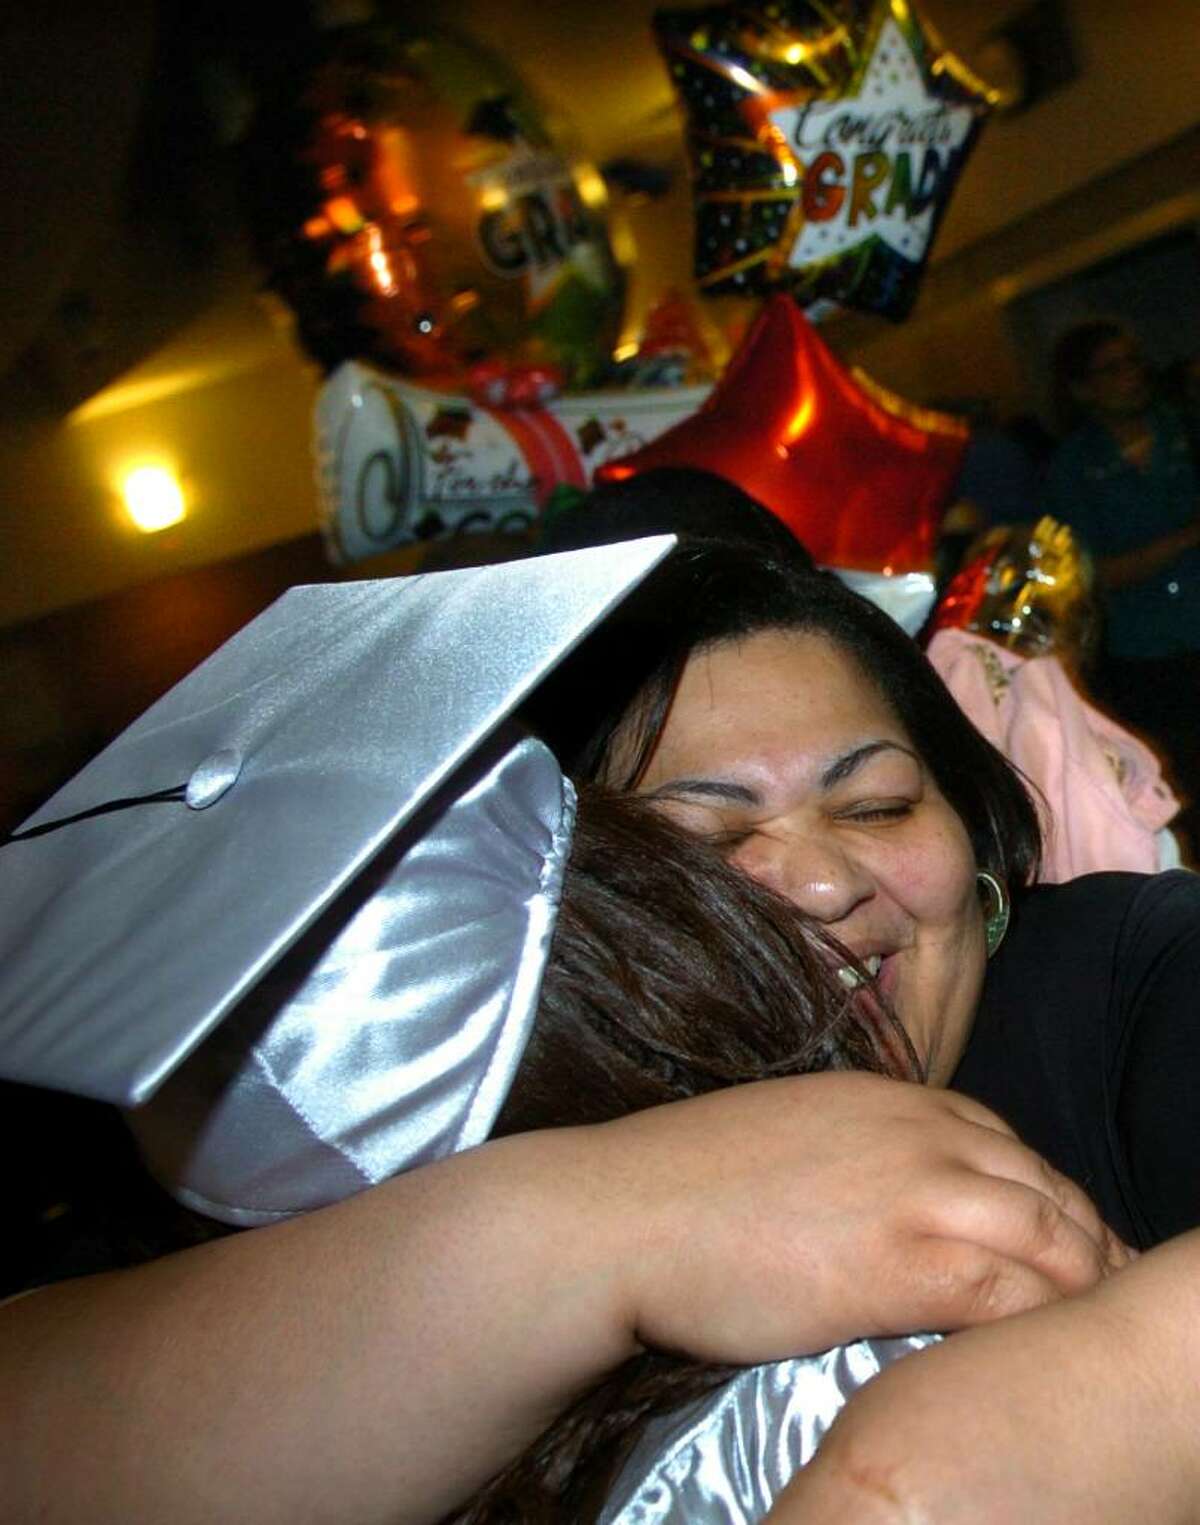 Barbara Jones hugs her daughter Tavarrea after graduating at Bridge Academy's 13th Annual Commencement Exercises held at Thurgood Marshall Middle School in Bridgeport, Conn. on Wednesday evening June 16, 2010.